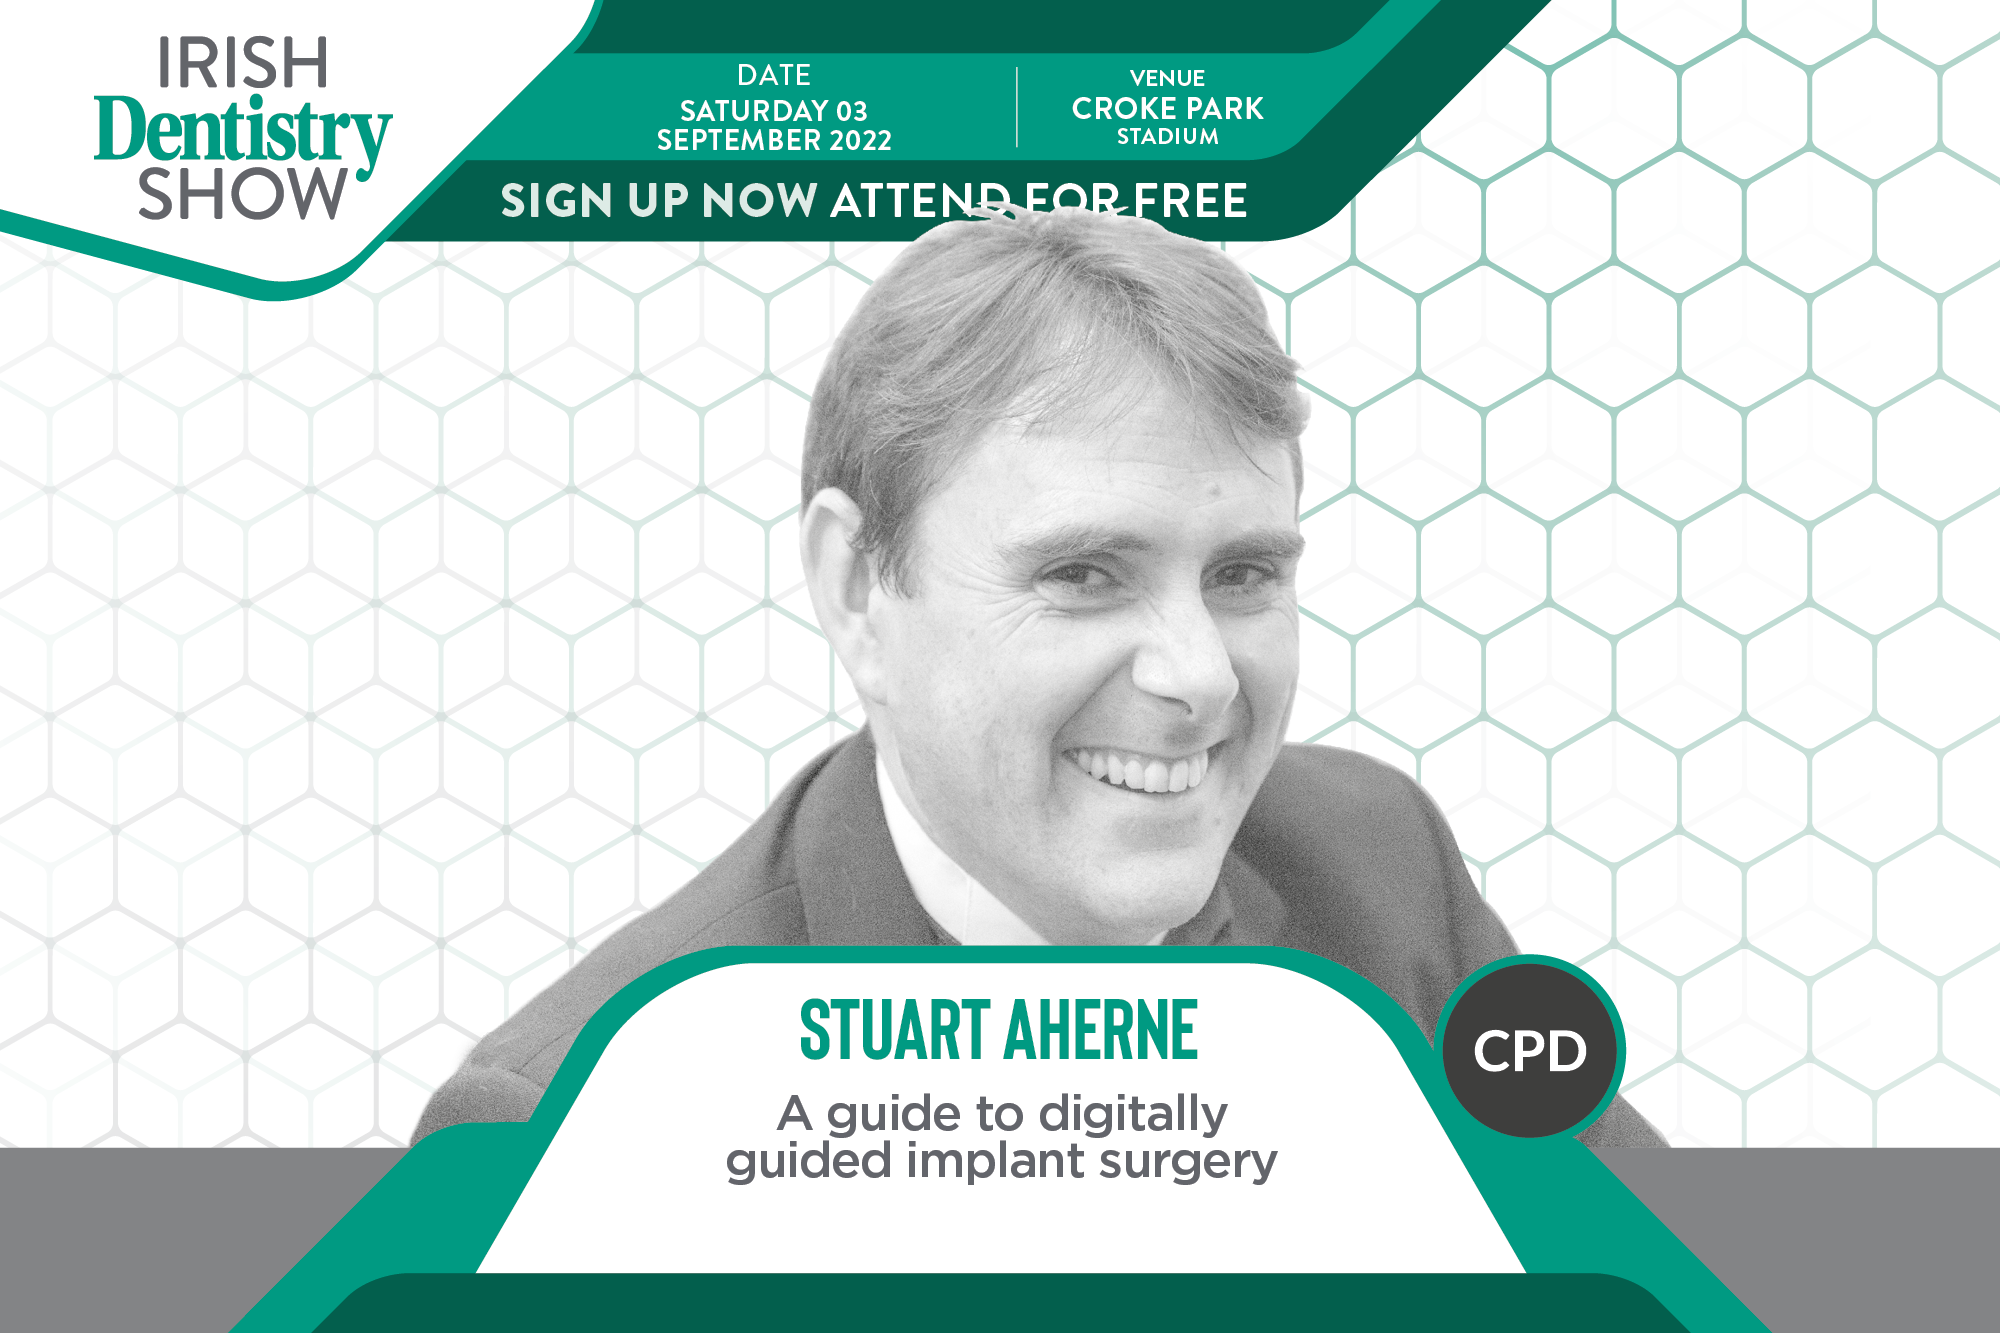 Stuart Aherne is making his way to the Irish Dentistry Show next weekend to tackle digitally guided implant surgery – sign up now!